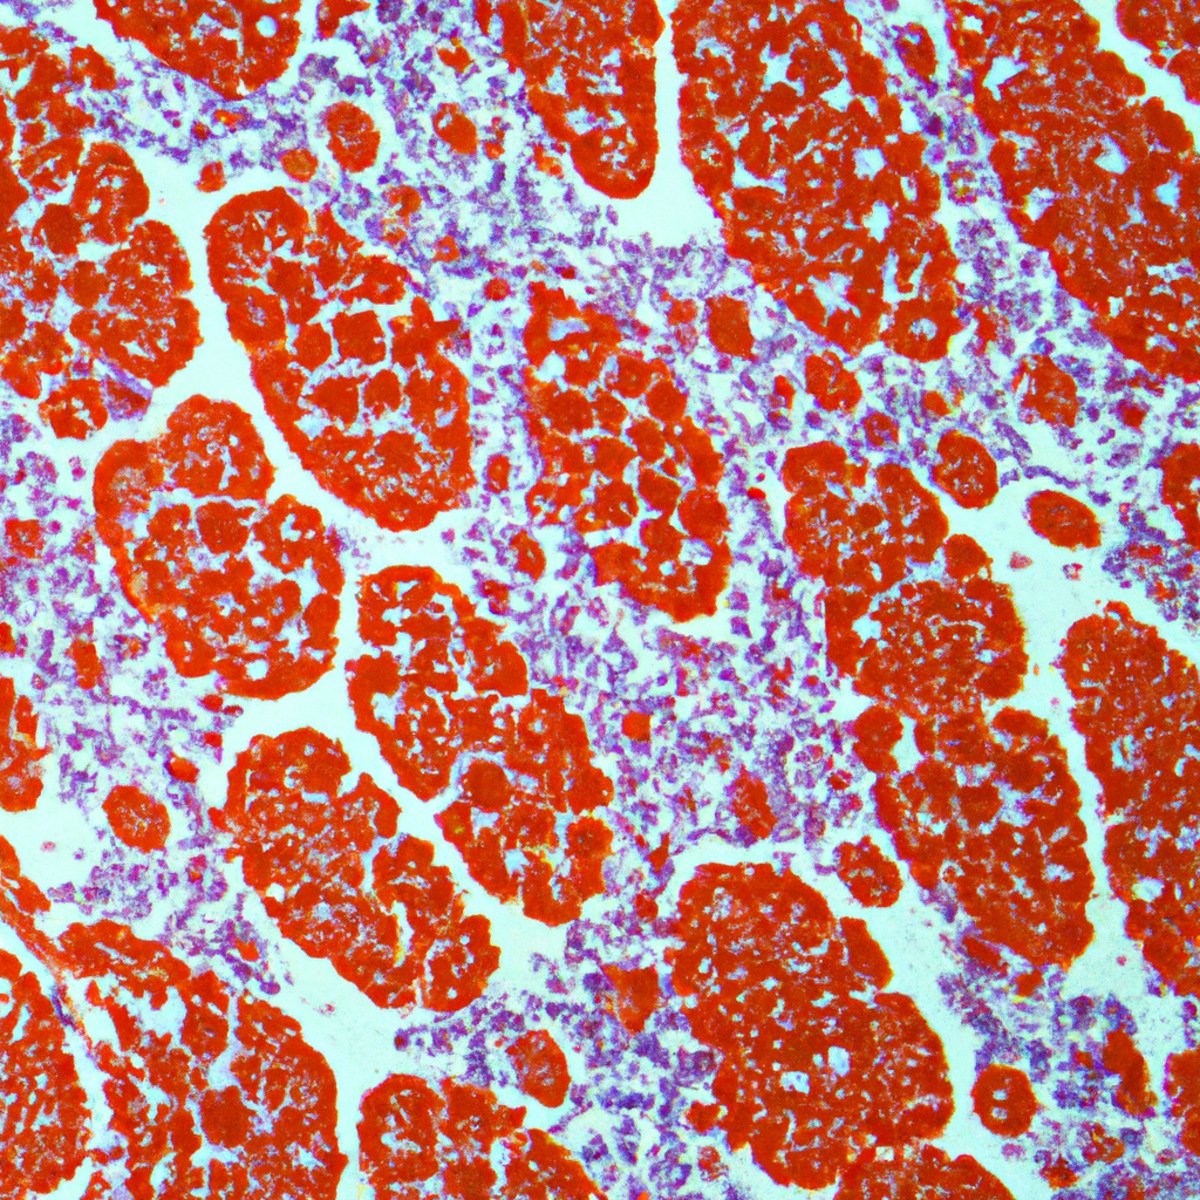 Close-up of stained kidney tissue samples showing intricate glomeruli structures and C3 deposits, revealing genetic mutations in Dense Deposit Disease.